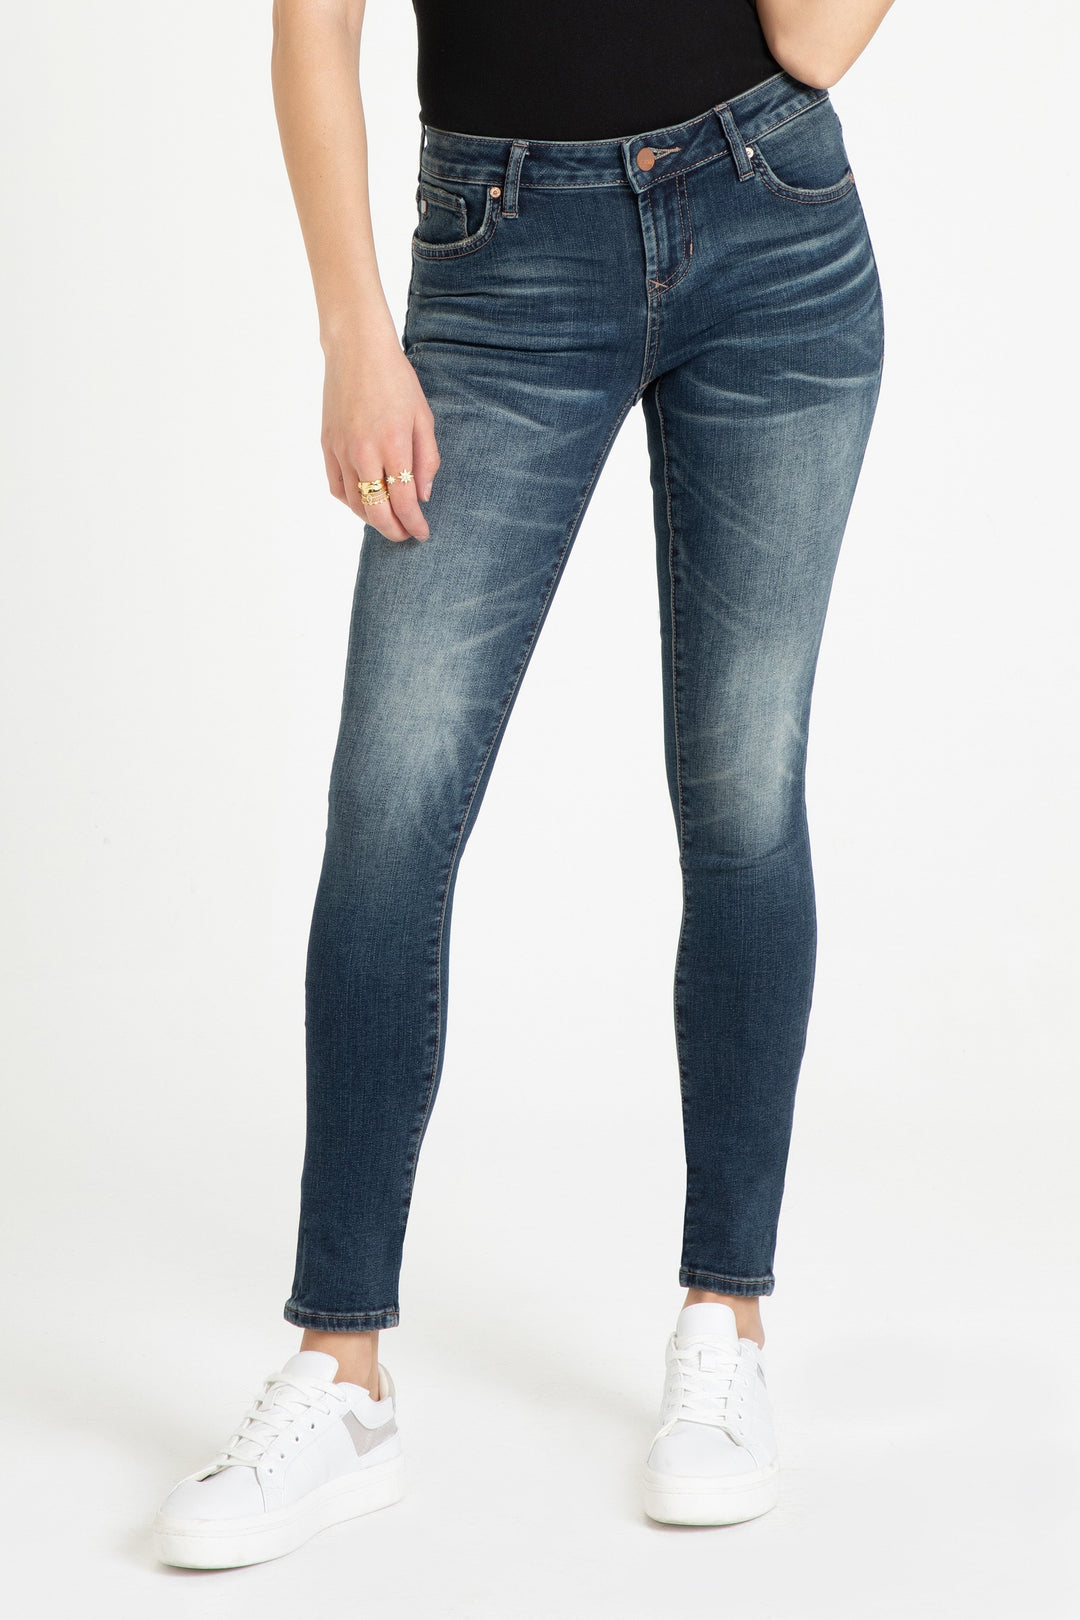 image of a female model wearing a JOYRICH MID RISE SKINNY JEANS KIRBY JEANS